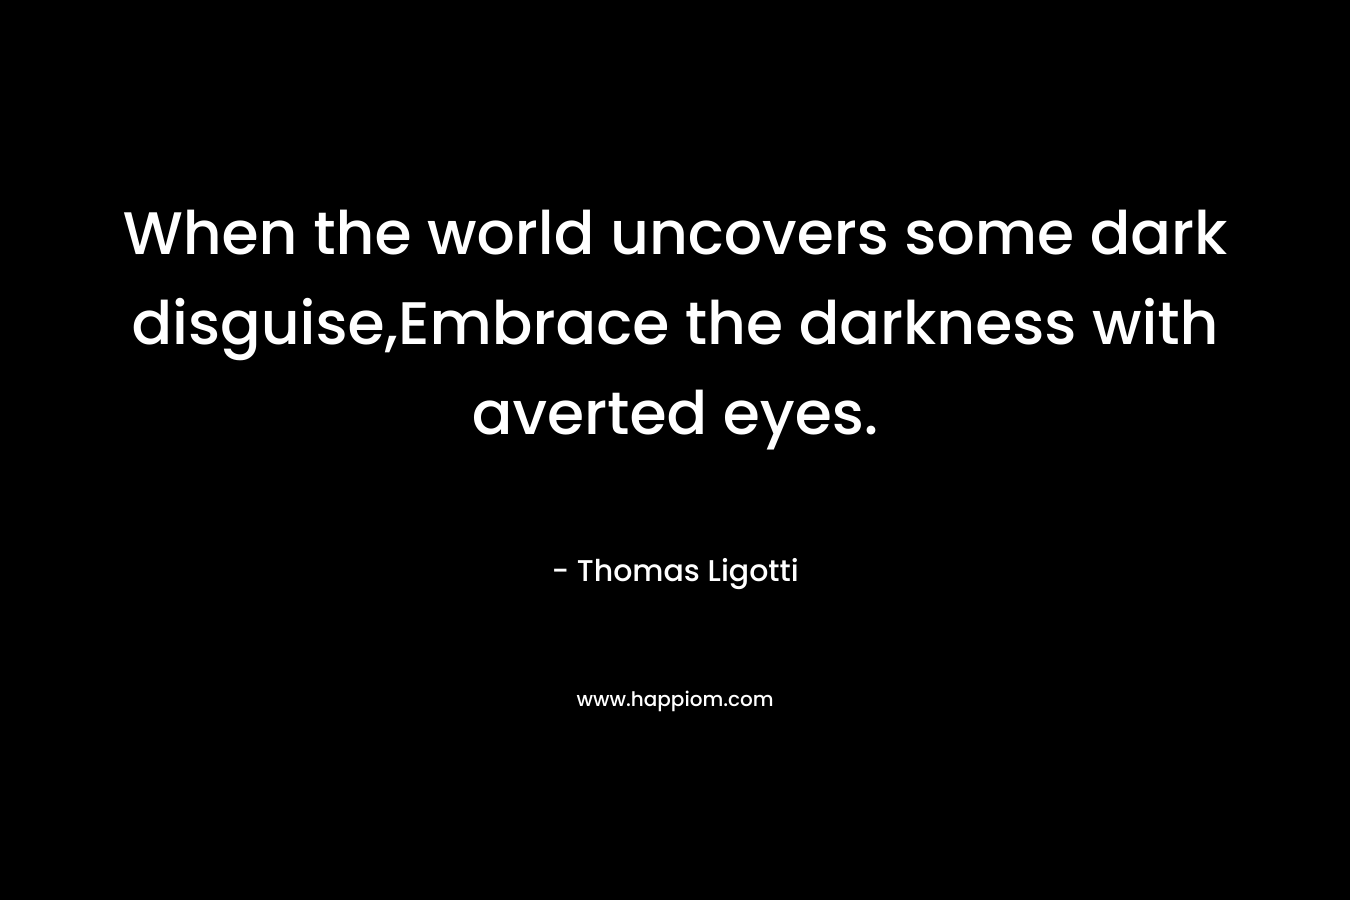 When the world uncovers some dark disguise,Embrace the darkness with averted eyes. – Thomas Ligotti